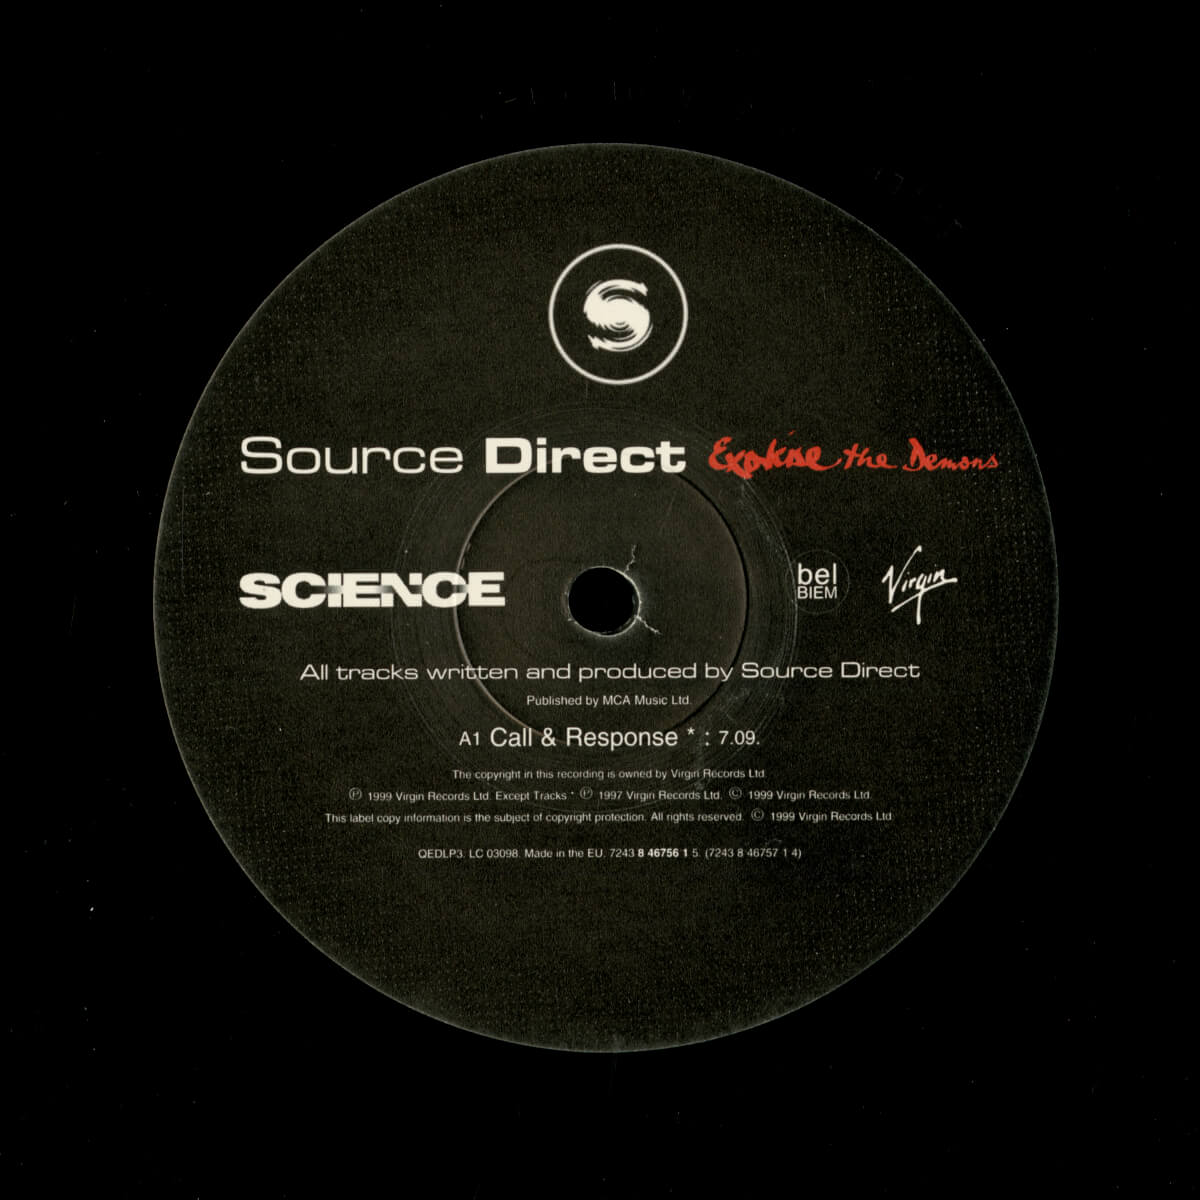 Source Direct – Exorcise The Demons